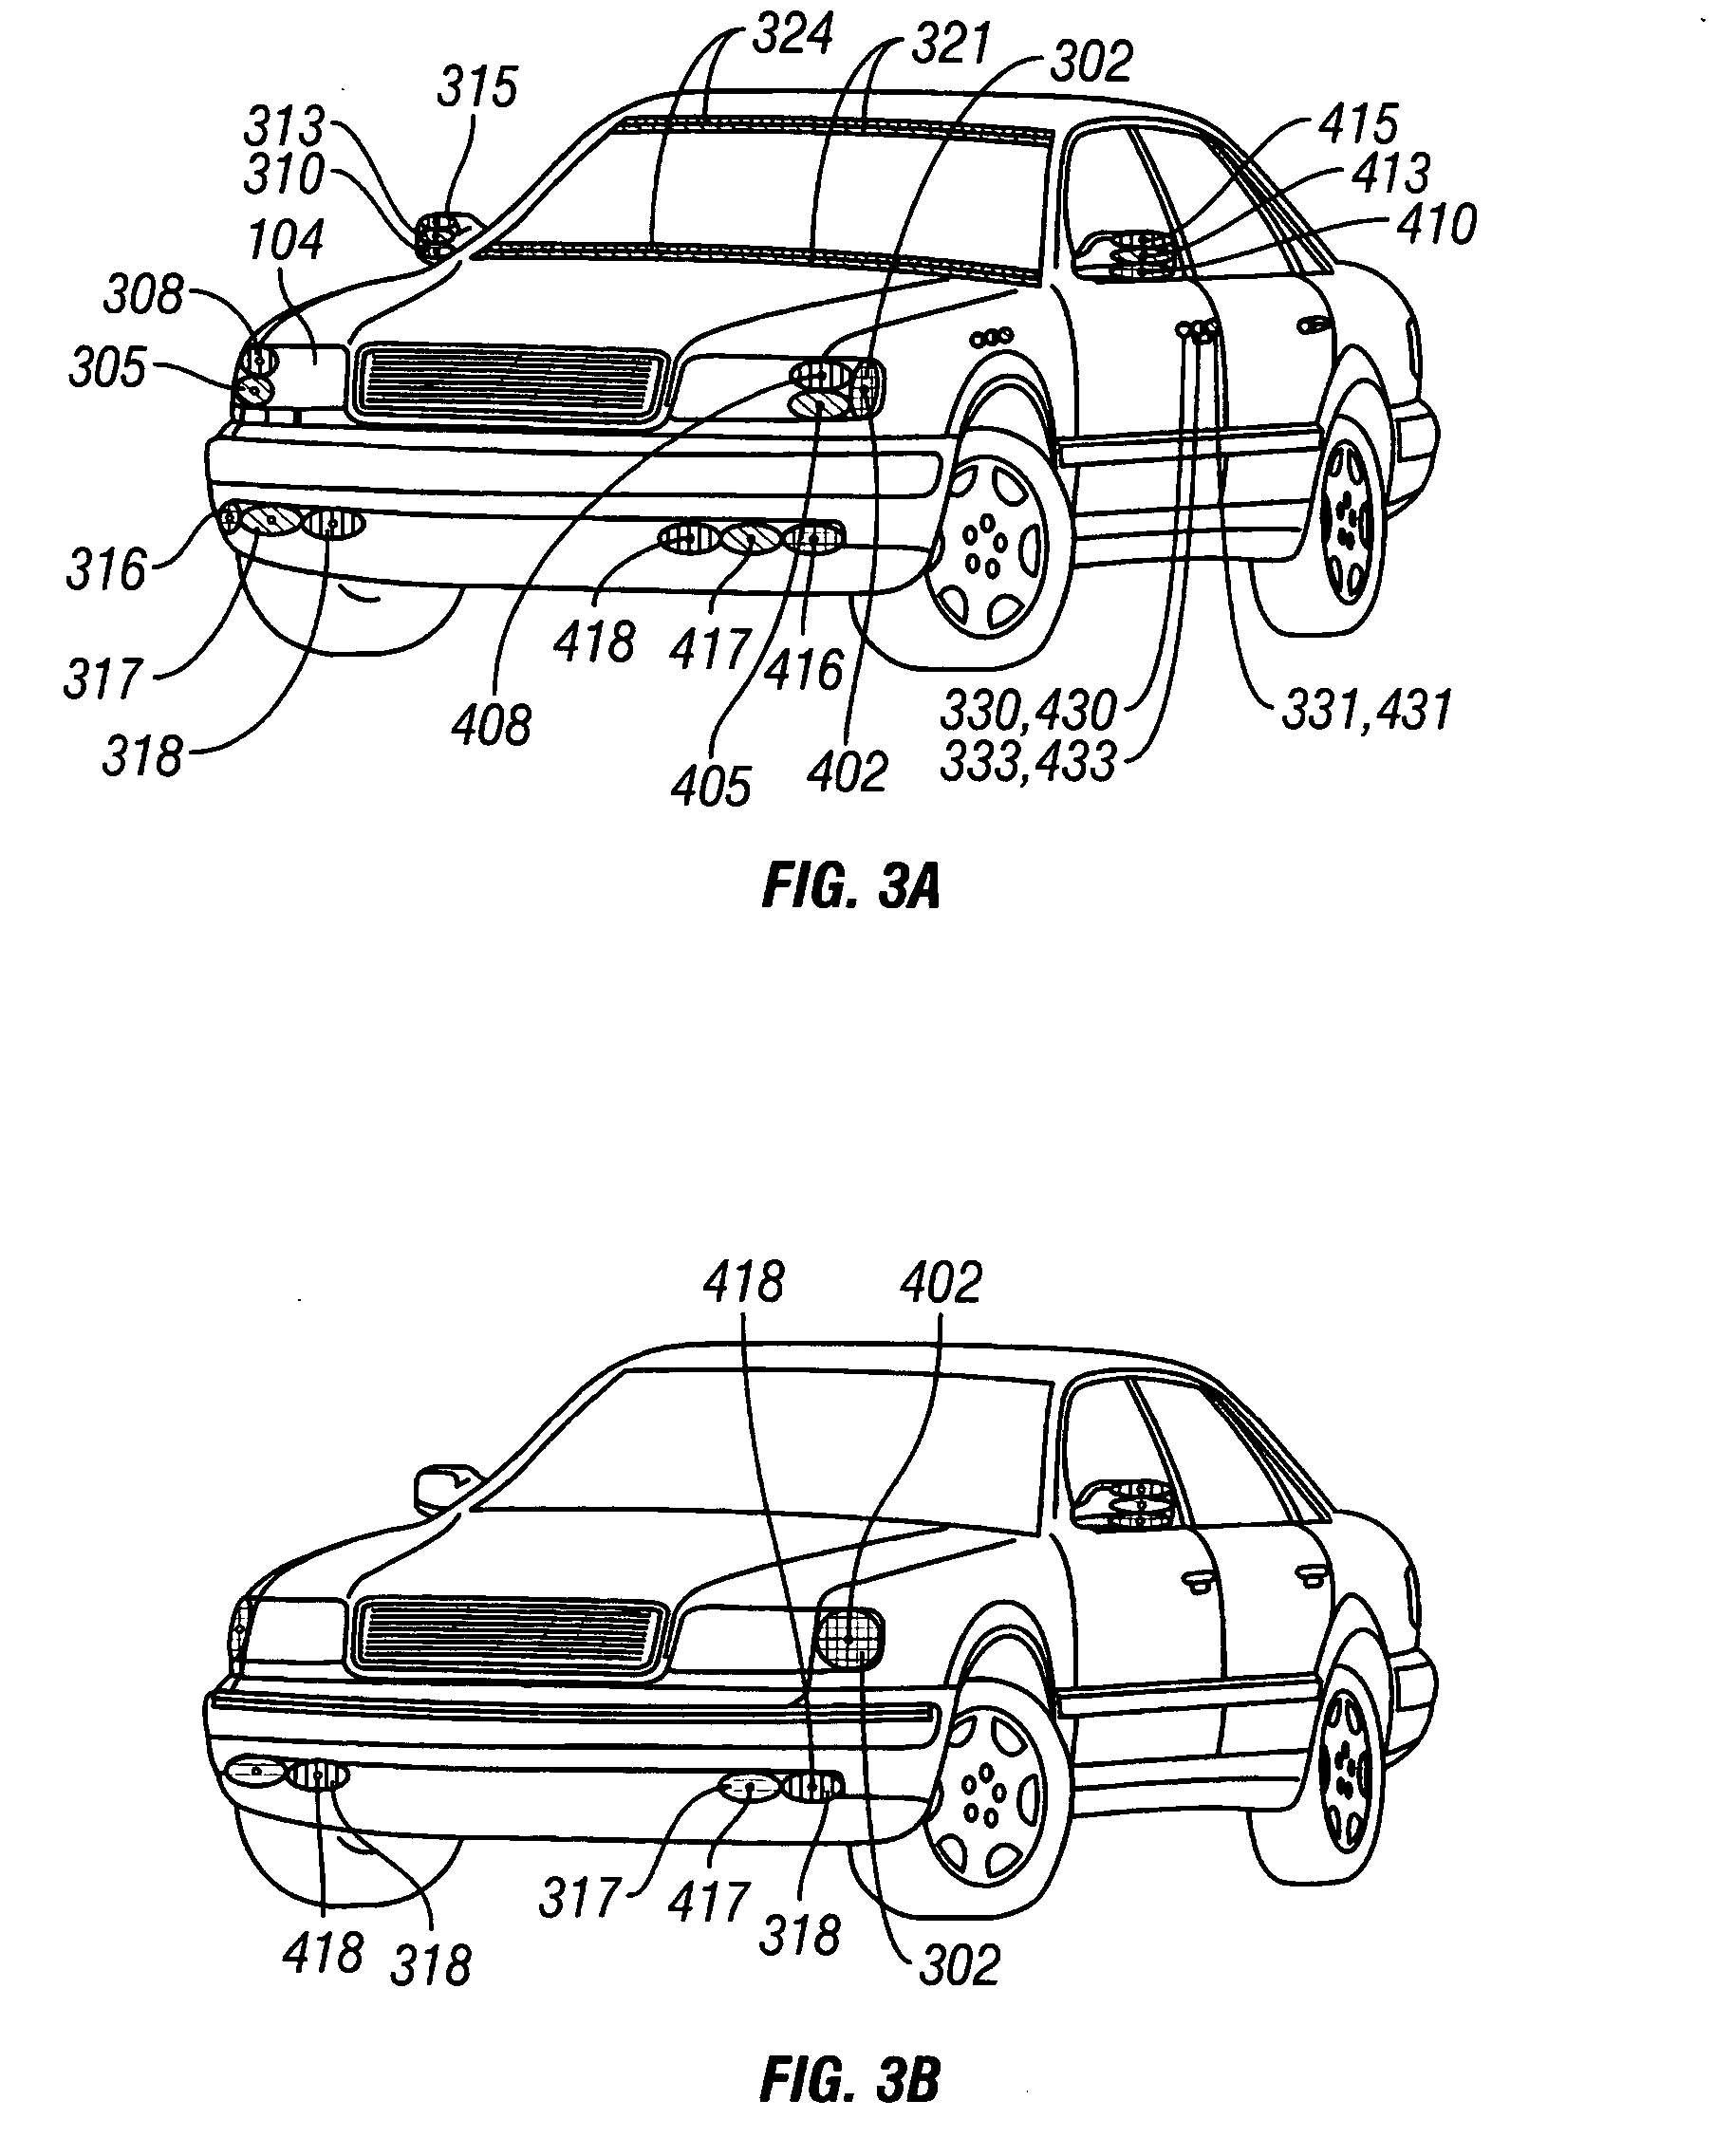 Method for a changing safety signaling system